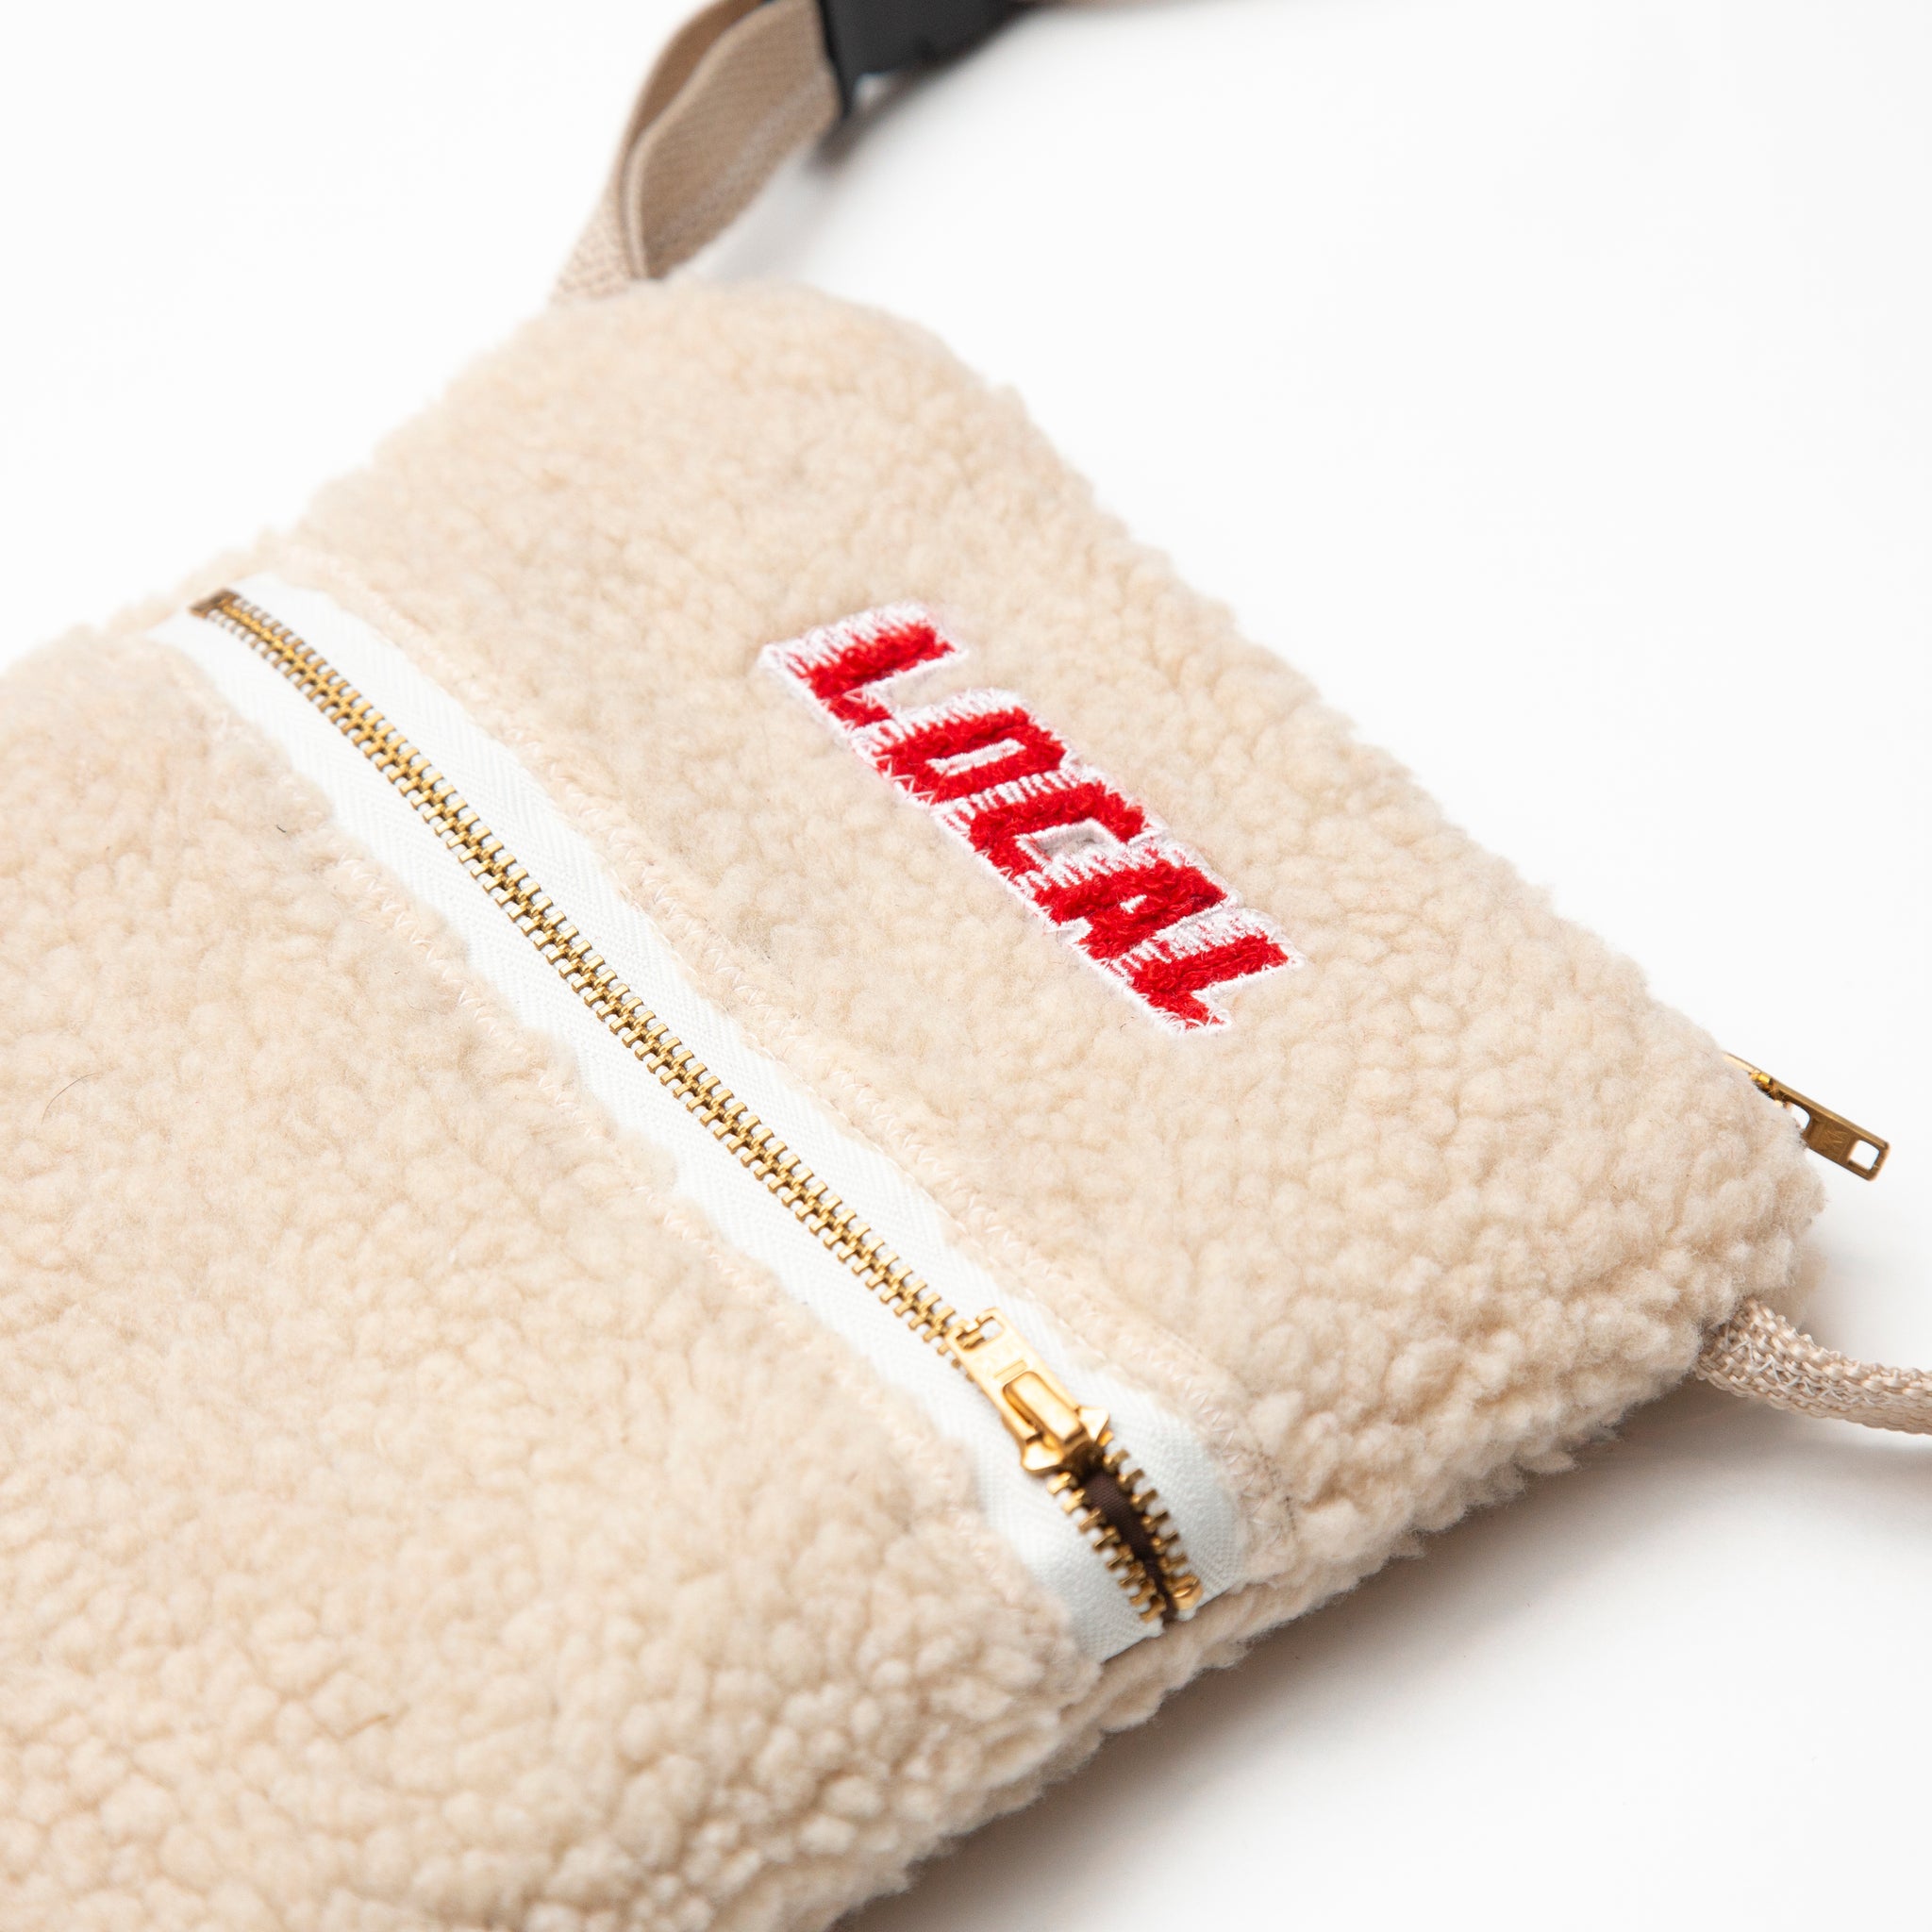 THE LOCAL - HEAVYWEIGHT SHERPA SIDE BAG, SPEED FONT.